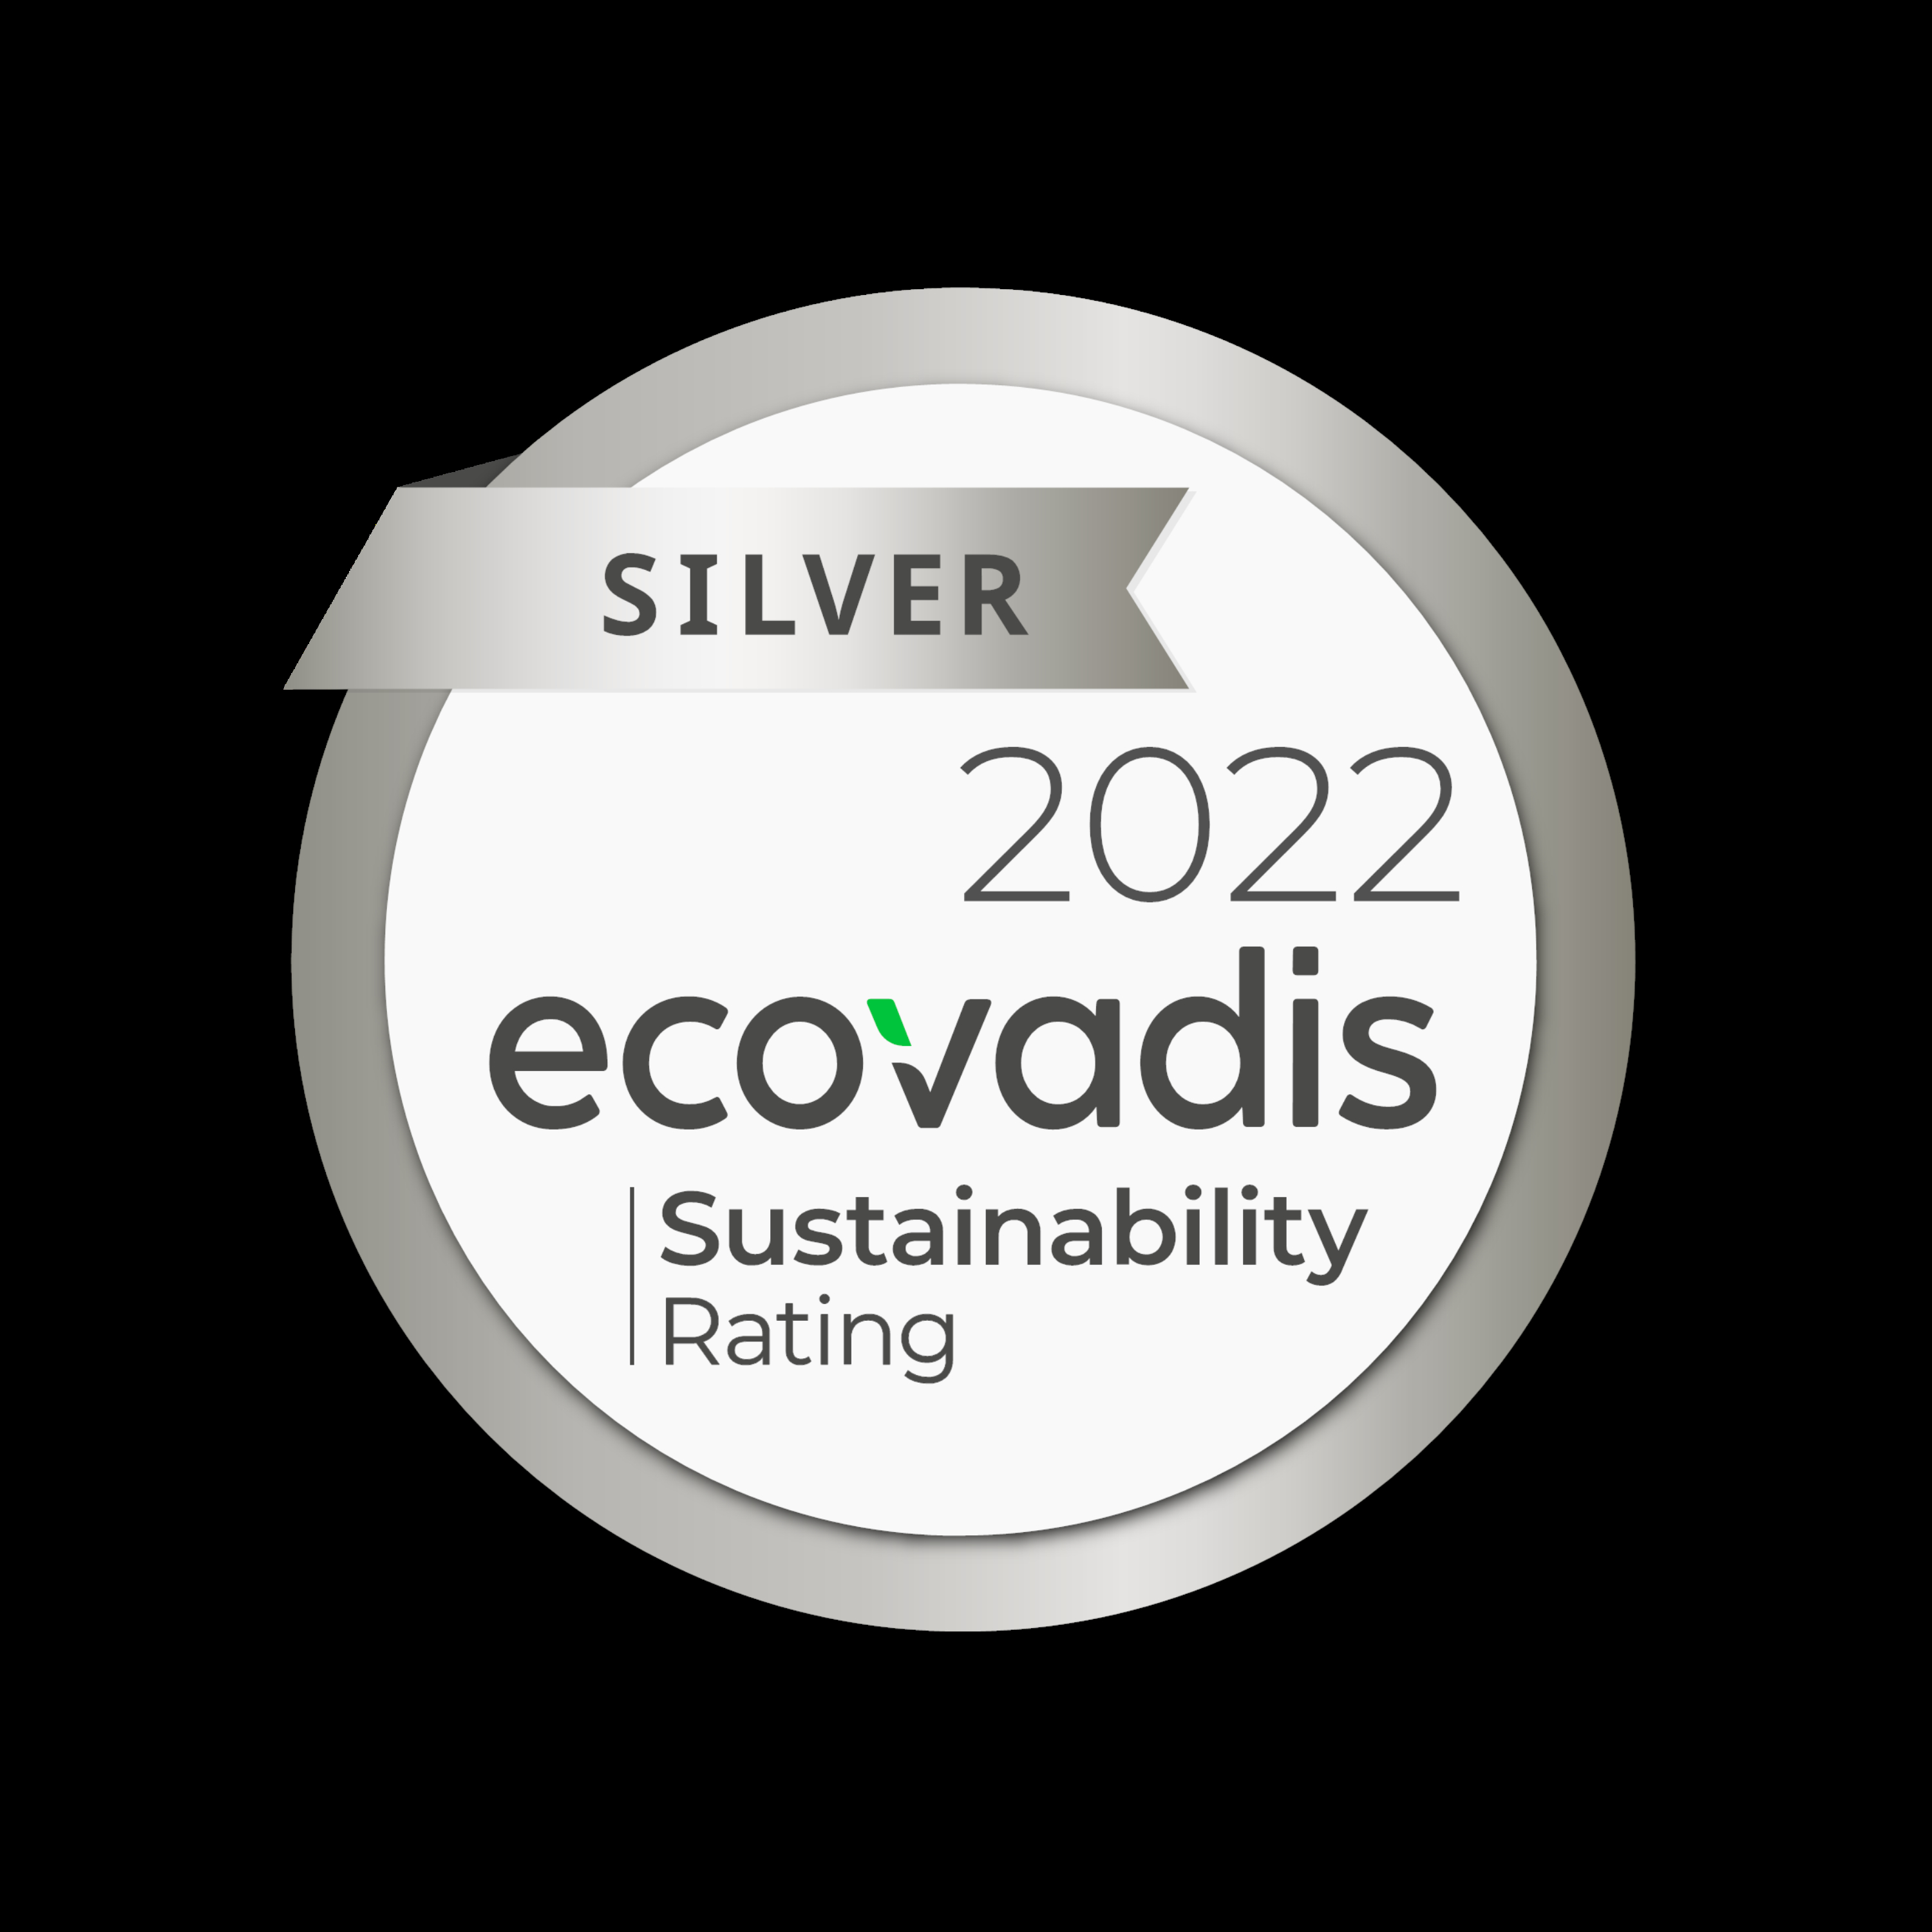 EDMA gets a silver medal further to its sustainability rating by EcoVadis